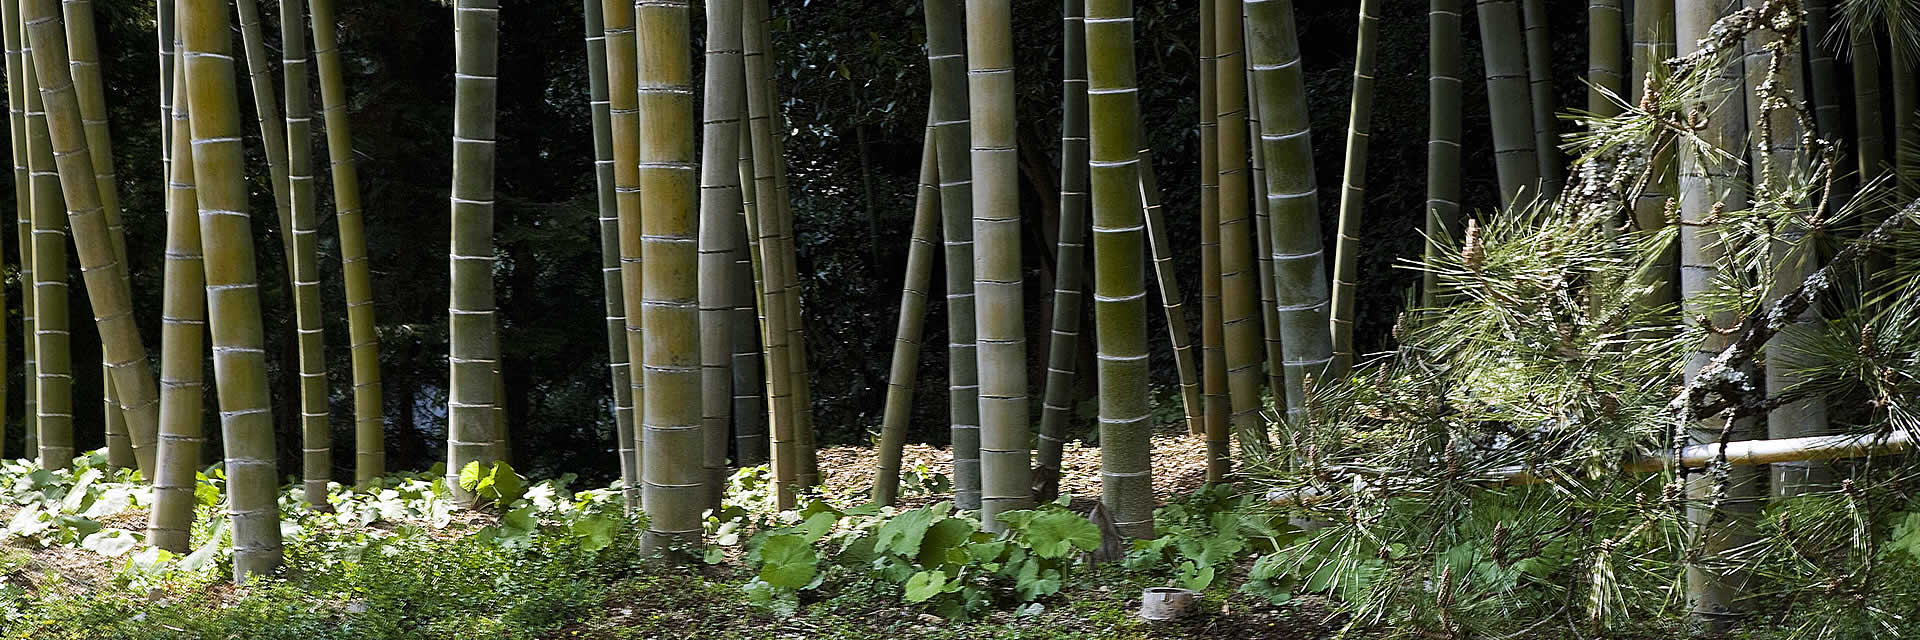 holly-forsyth-bamboo-forest